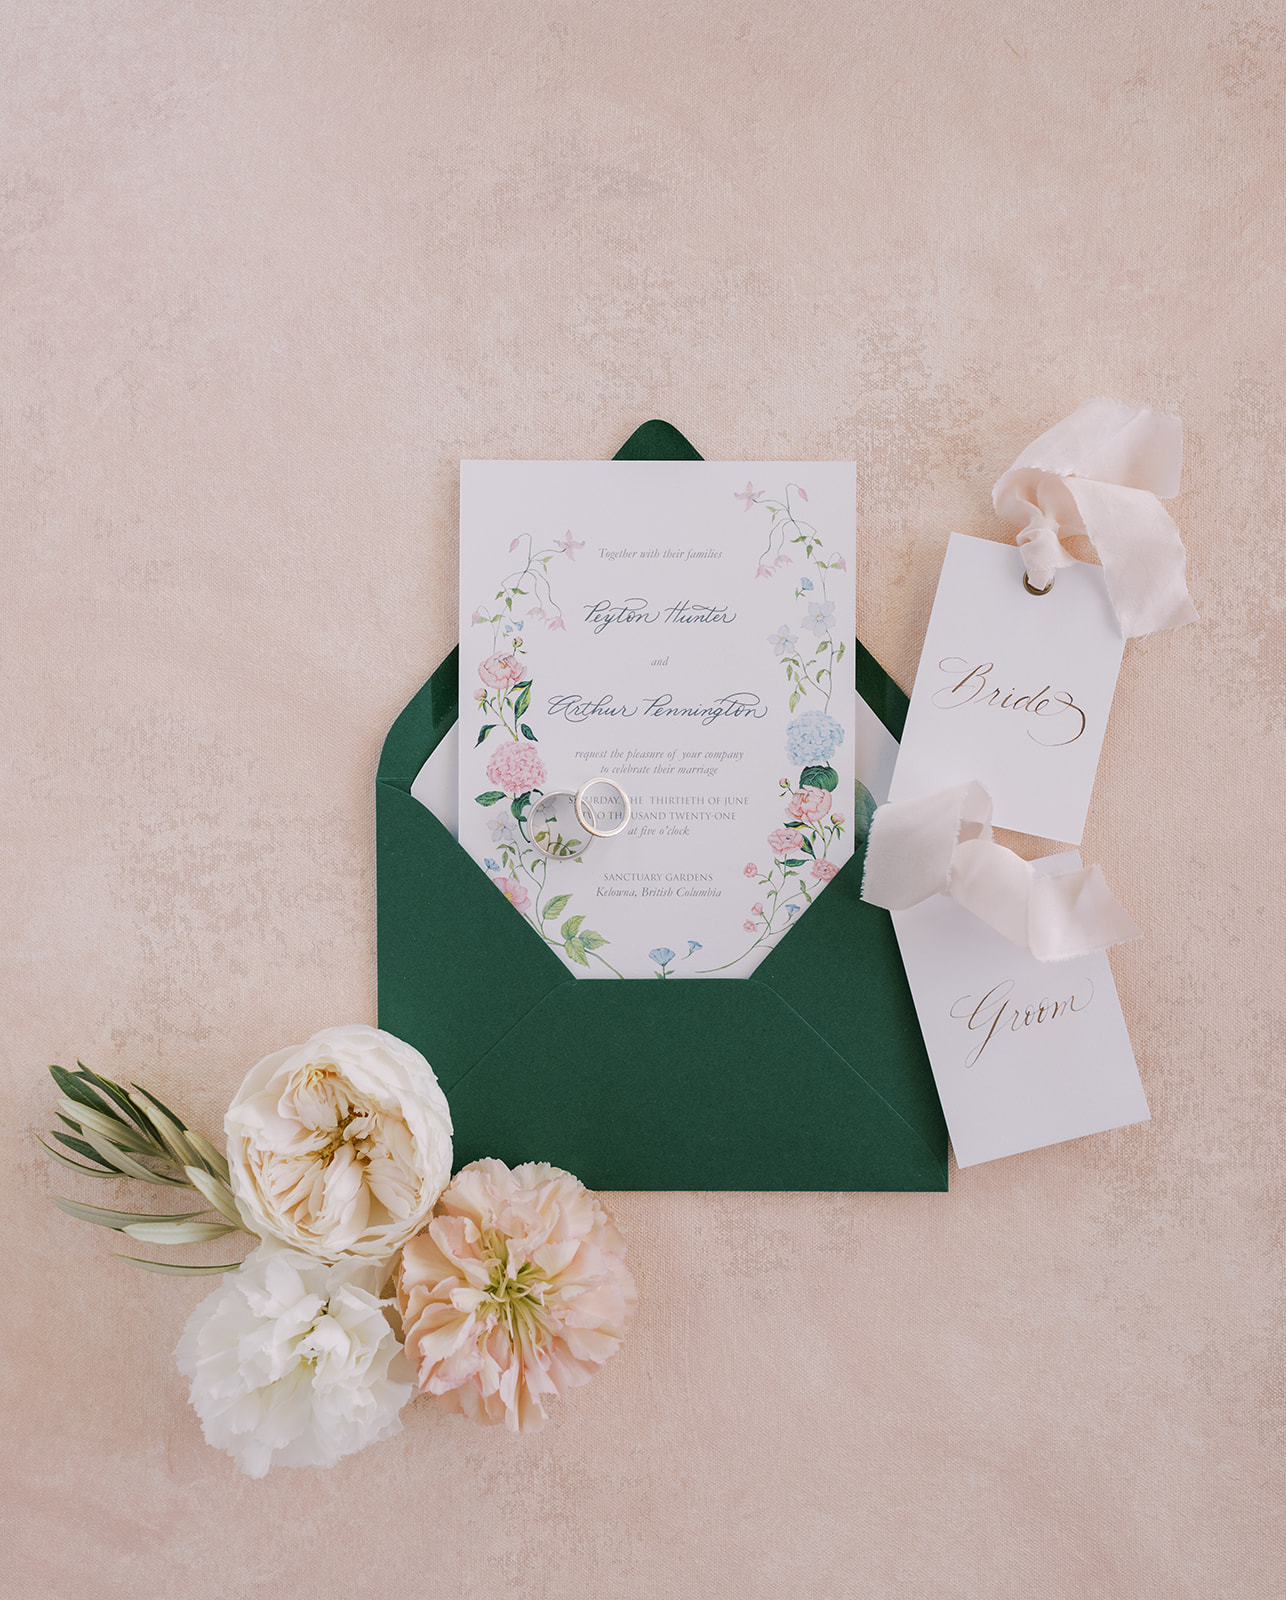 Debbie Wong Designs stationery suite in emerald green with nature motifs